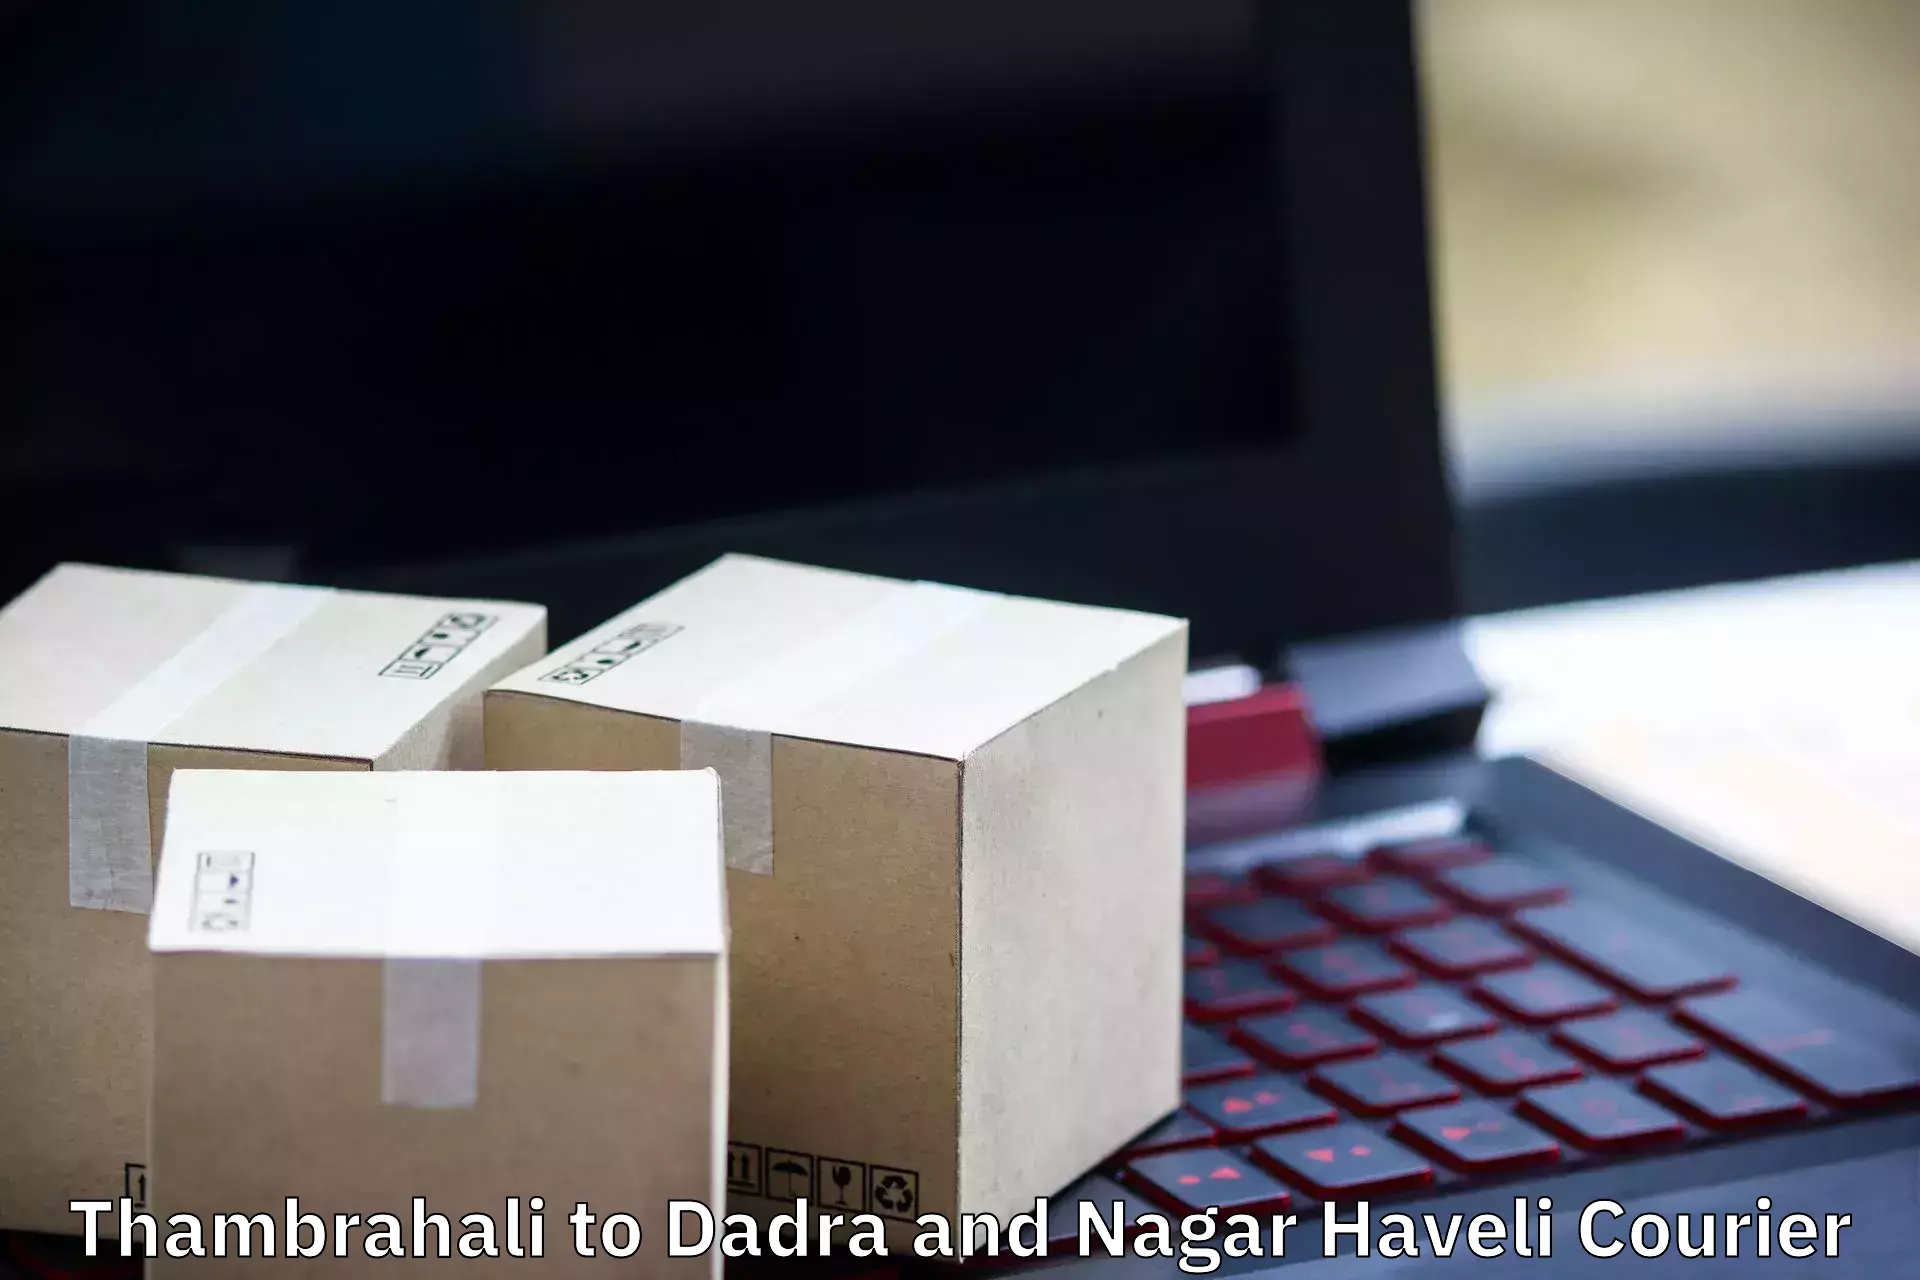 Quality relocation assistance Thambrahali to Dadra and Nagar Haveli